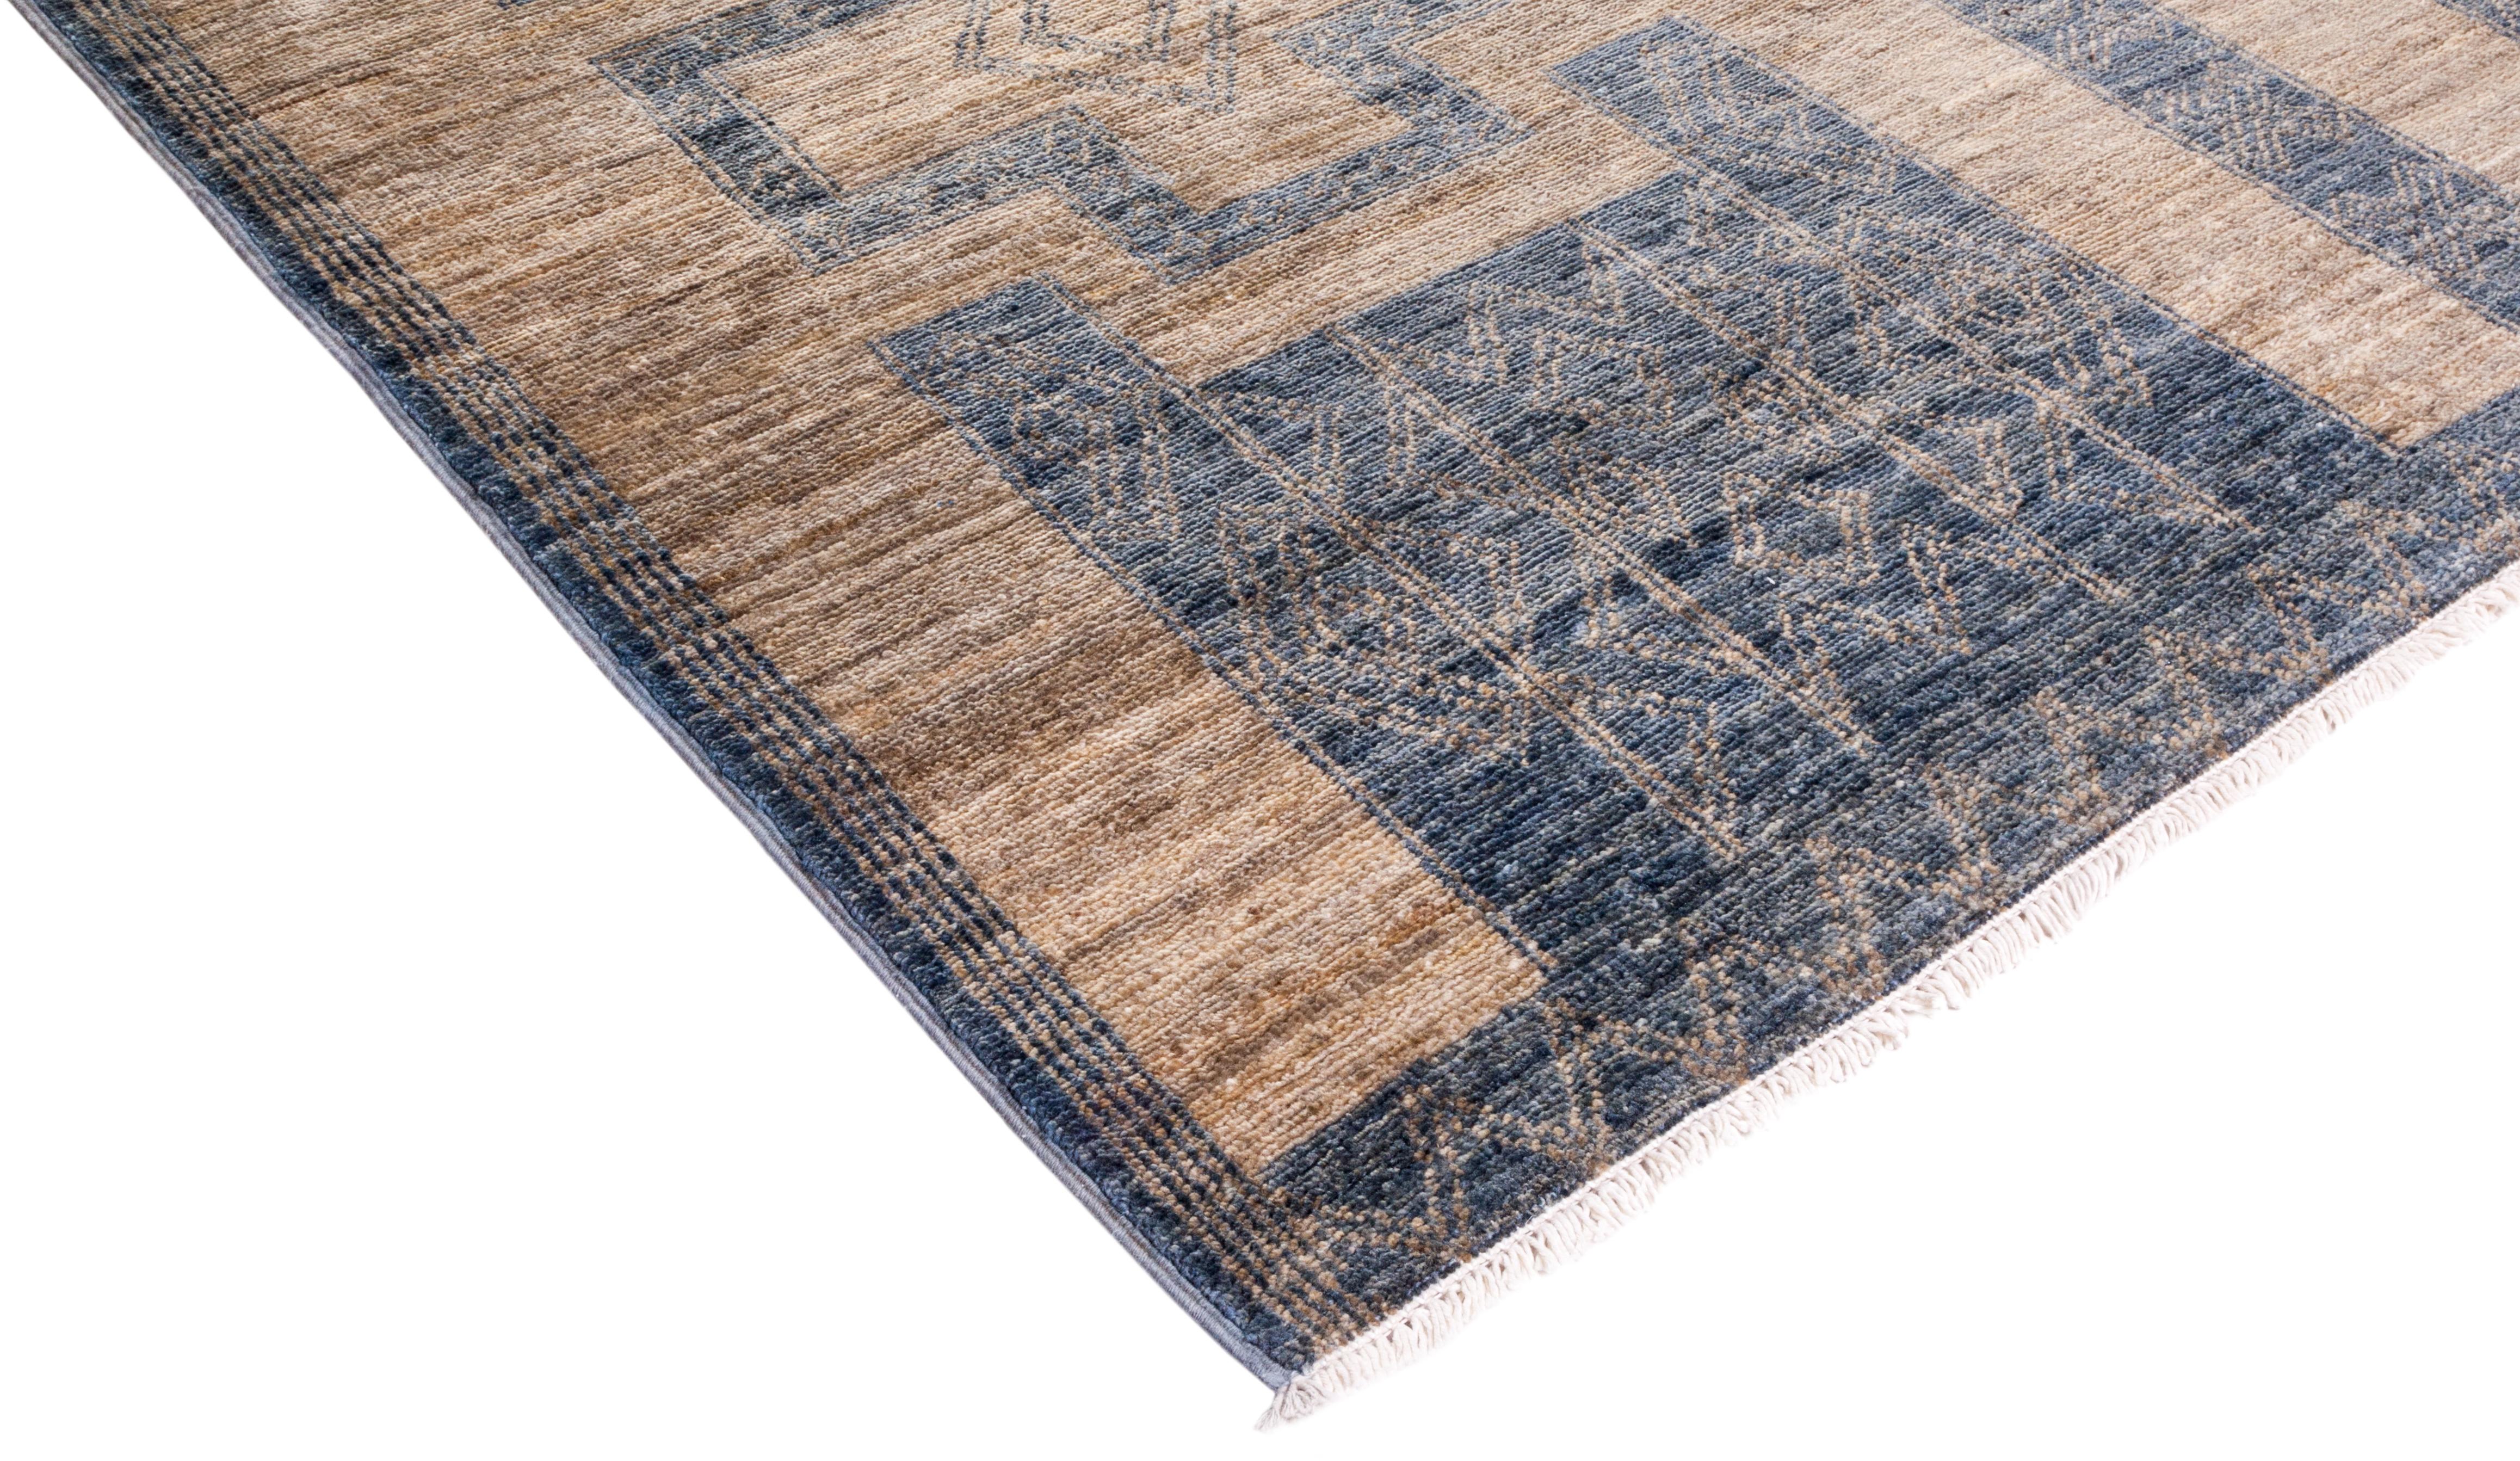 Color: Ivory, made in Pakistan. 100% wool. The rich textile tradition of western Africa inspired the Tribal collection of hand knotted rugs. Incorporating a medley of geometric motifs, in palettes ranging from earthy to vivacious, these rugs bring a